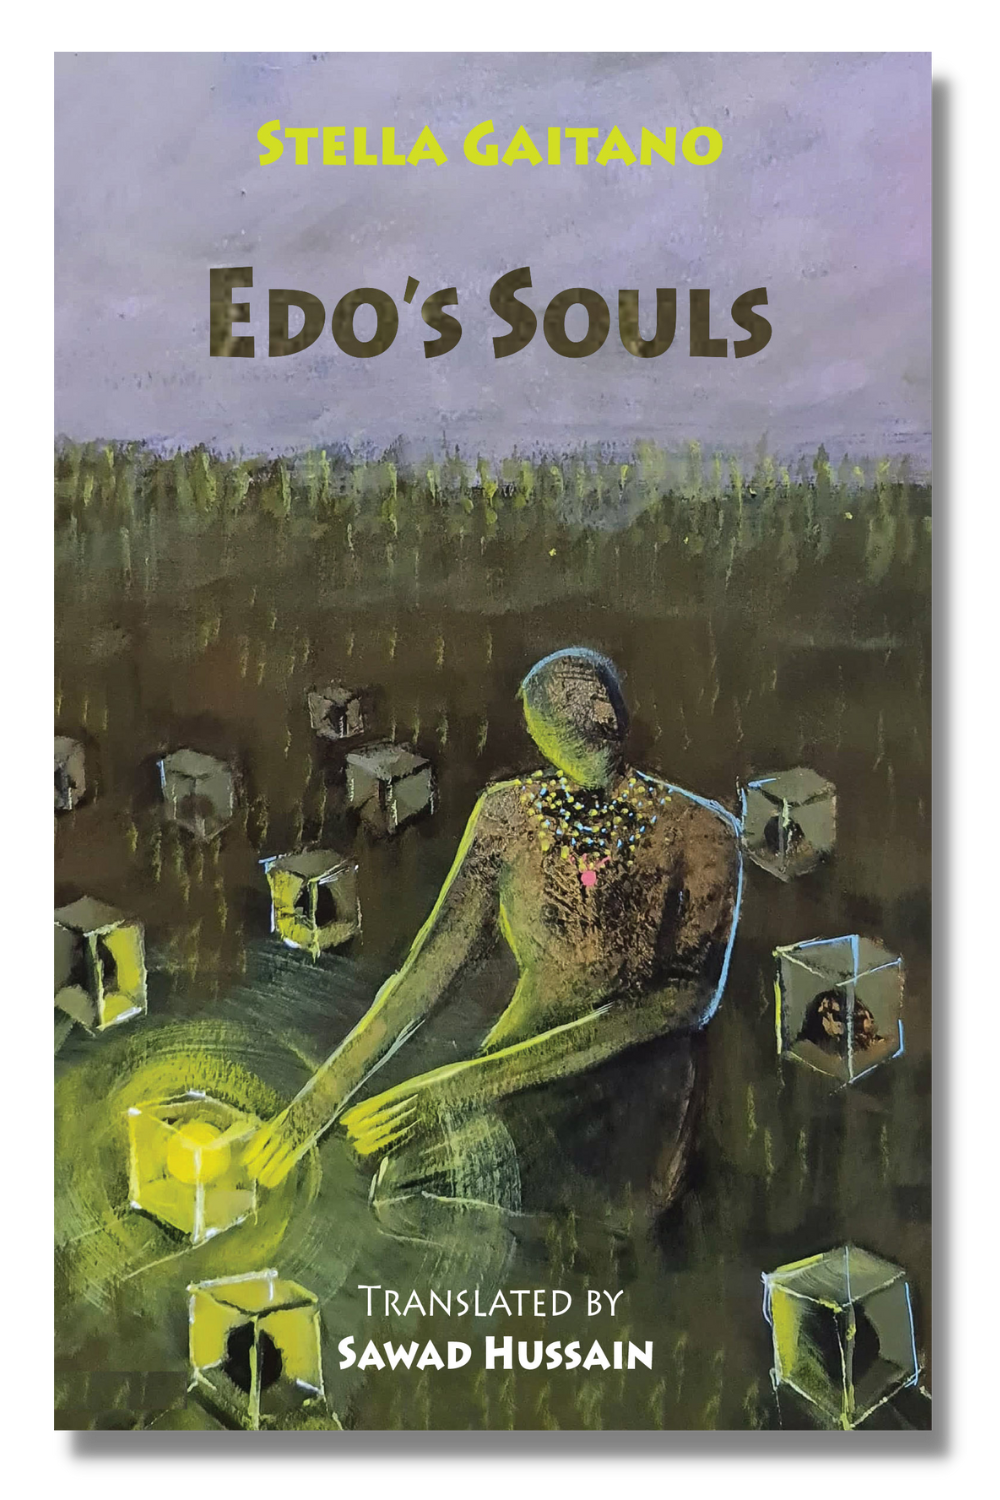 The cover of "Edo's Souls"